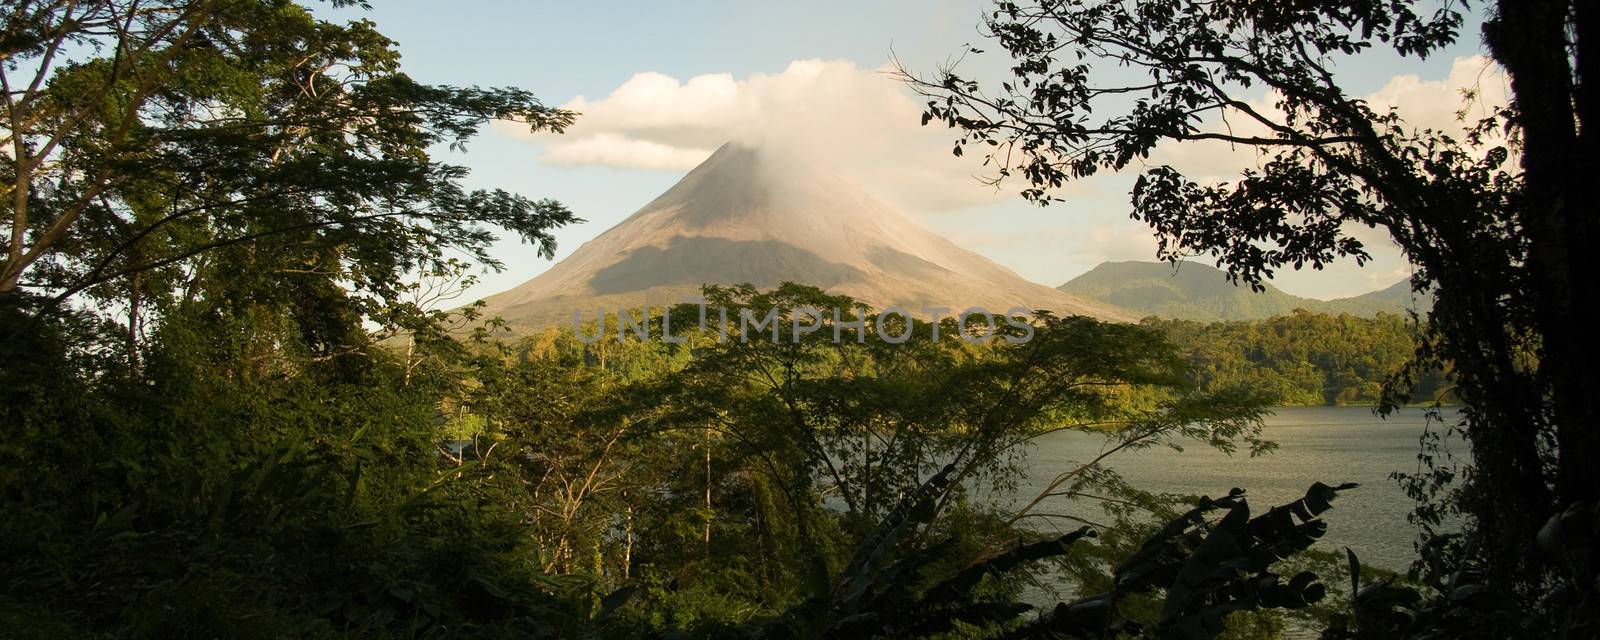 Arenal Volcano, Costa Rica by CelsoDiniz